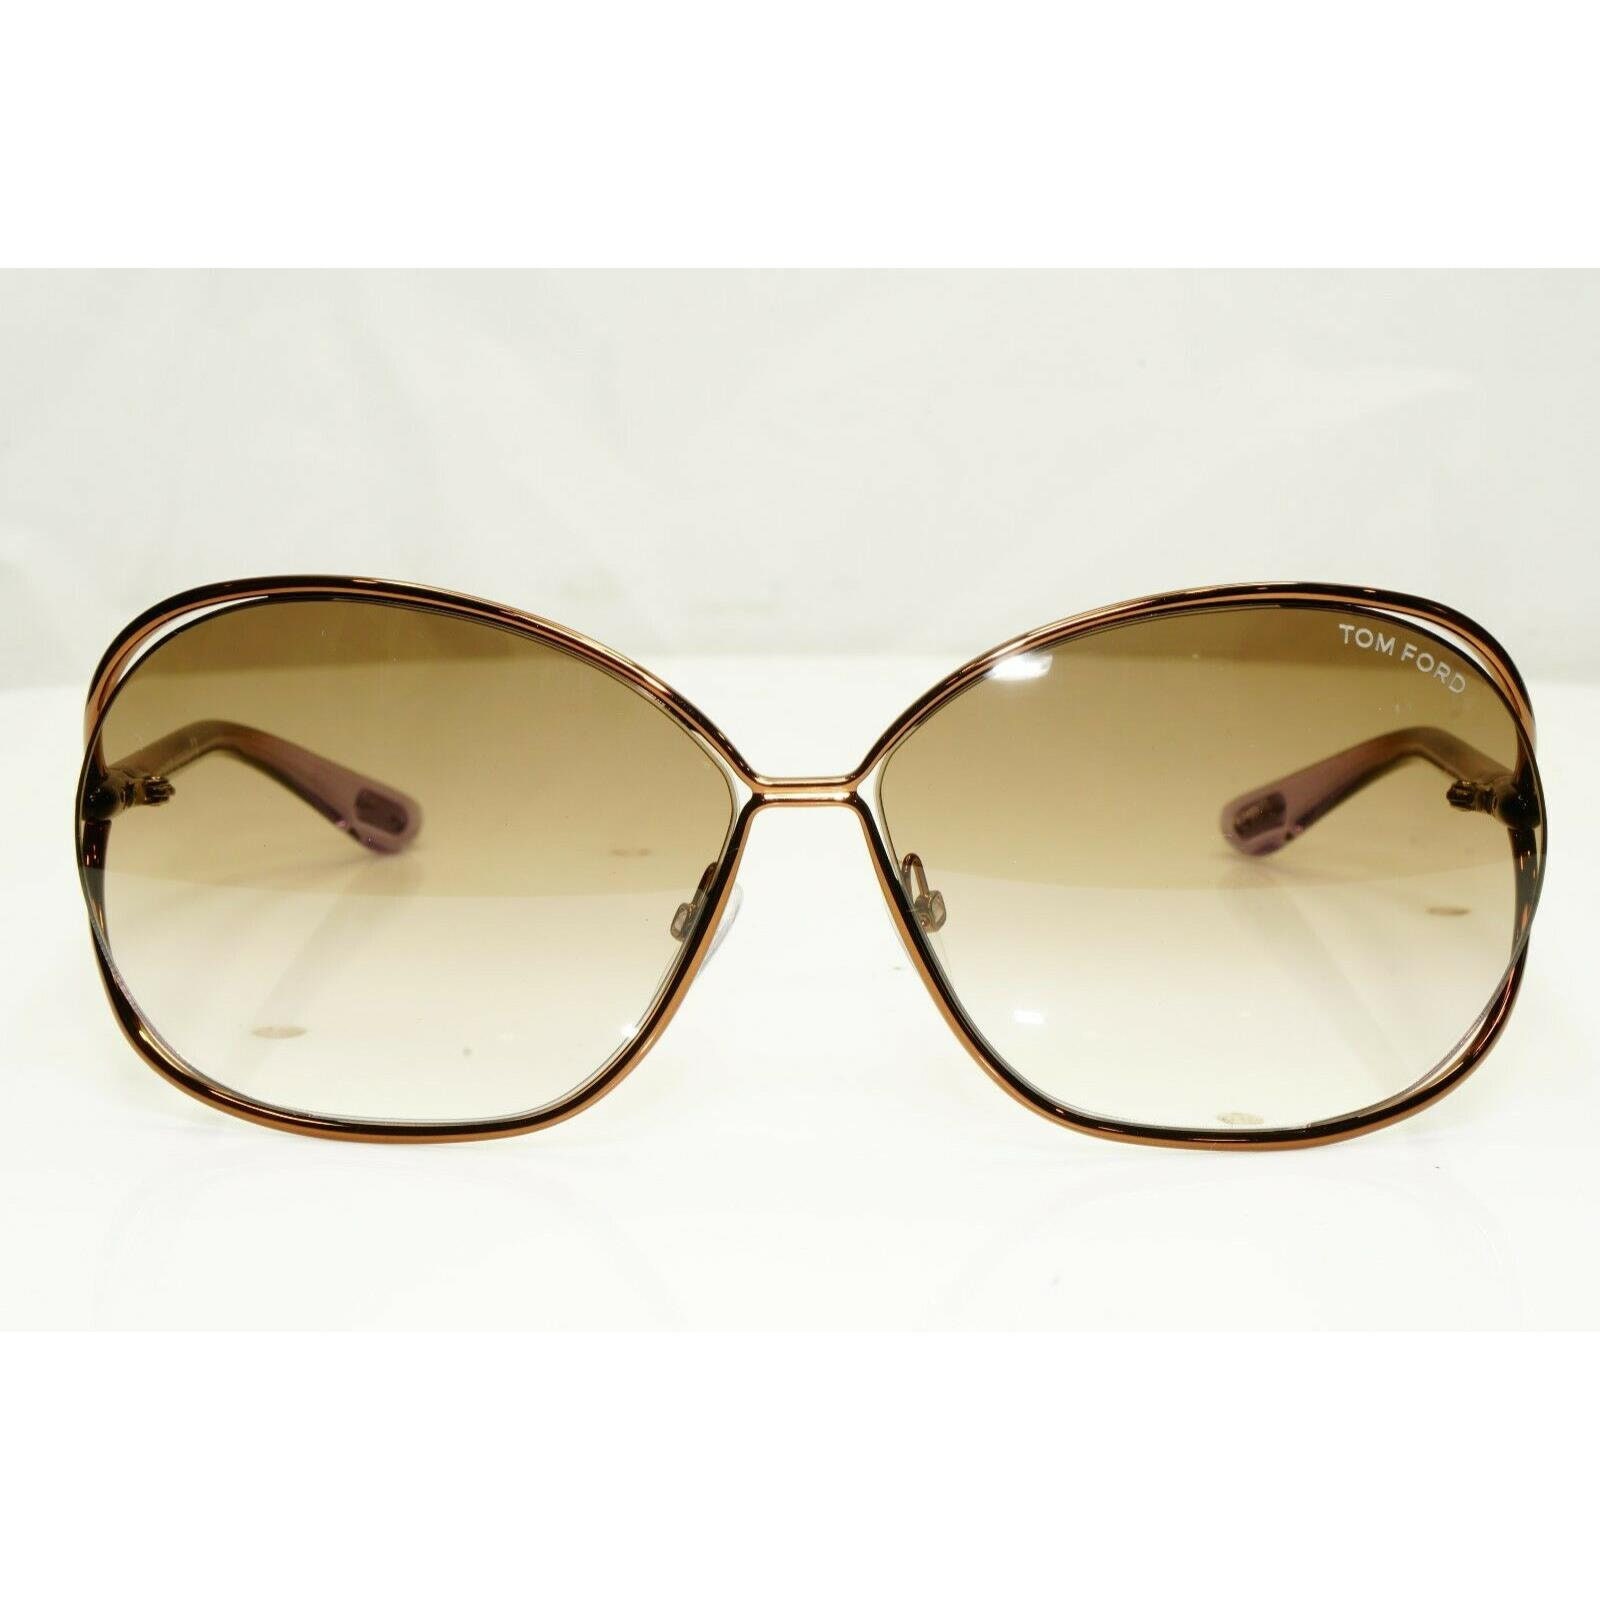 Authentic Tom Ford Womens Sunglasses Shiny Bronze Brown Carla - Etsy  Singapore